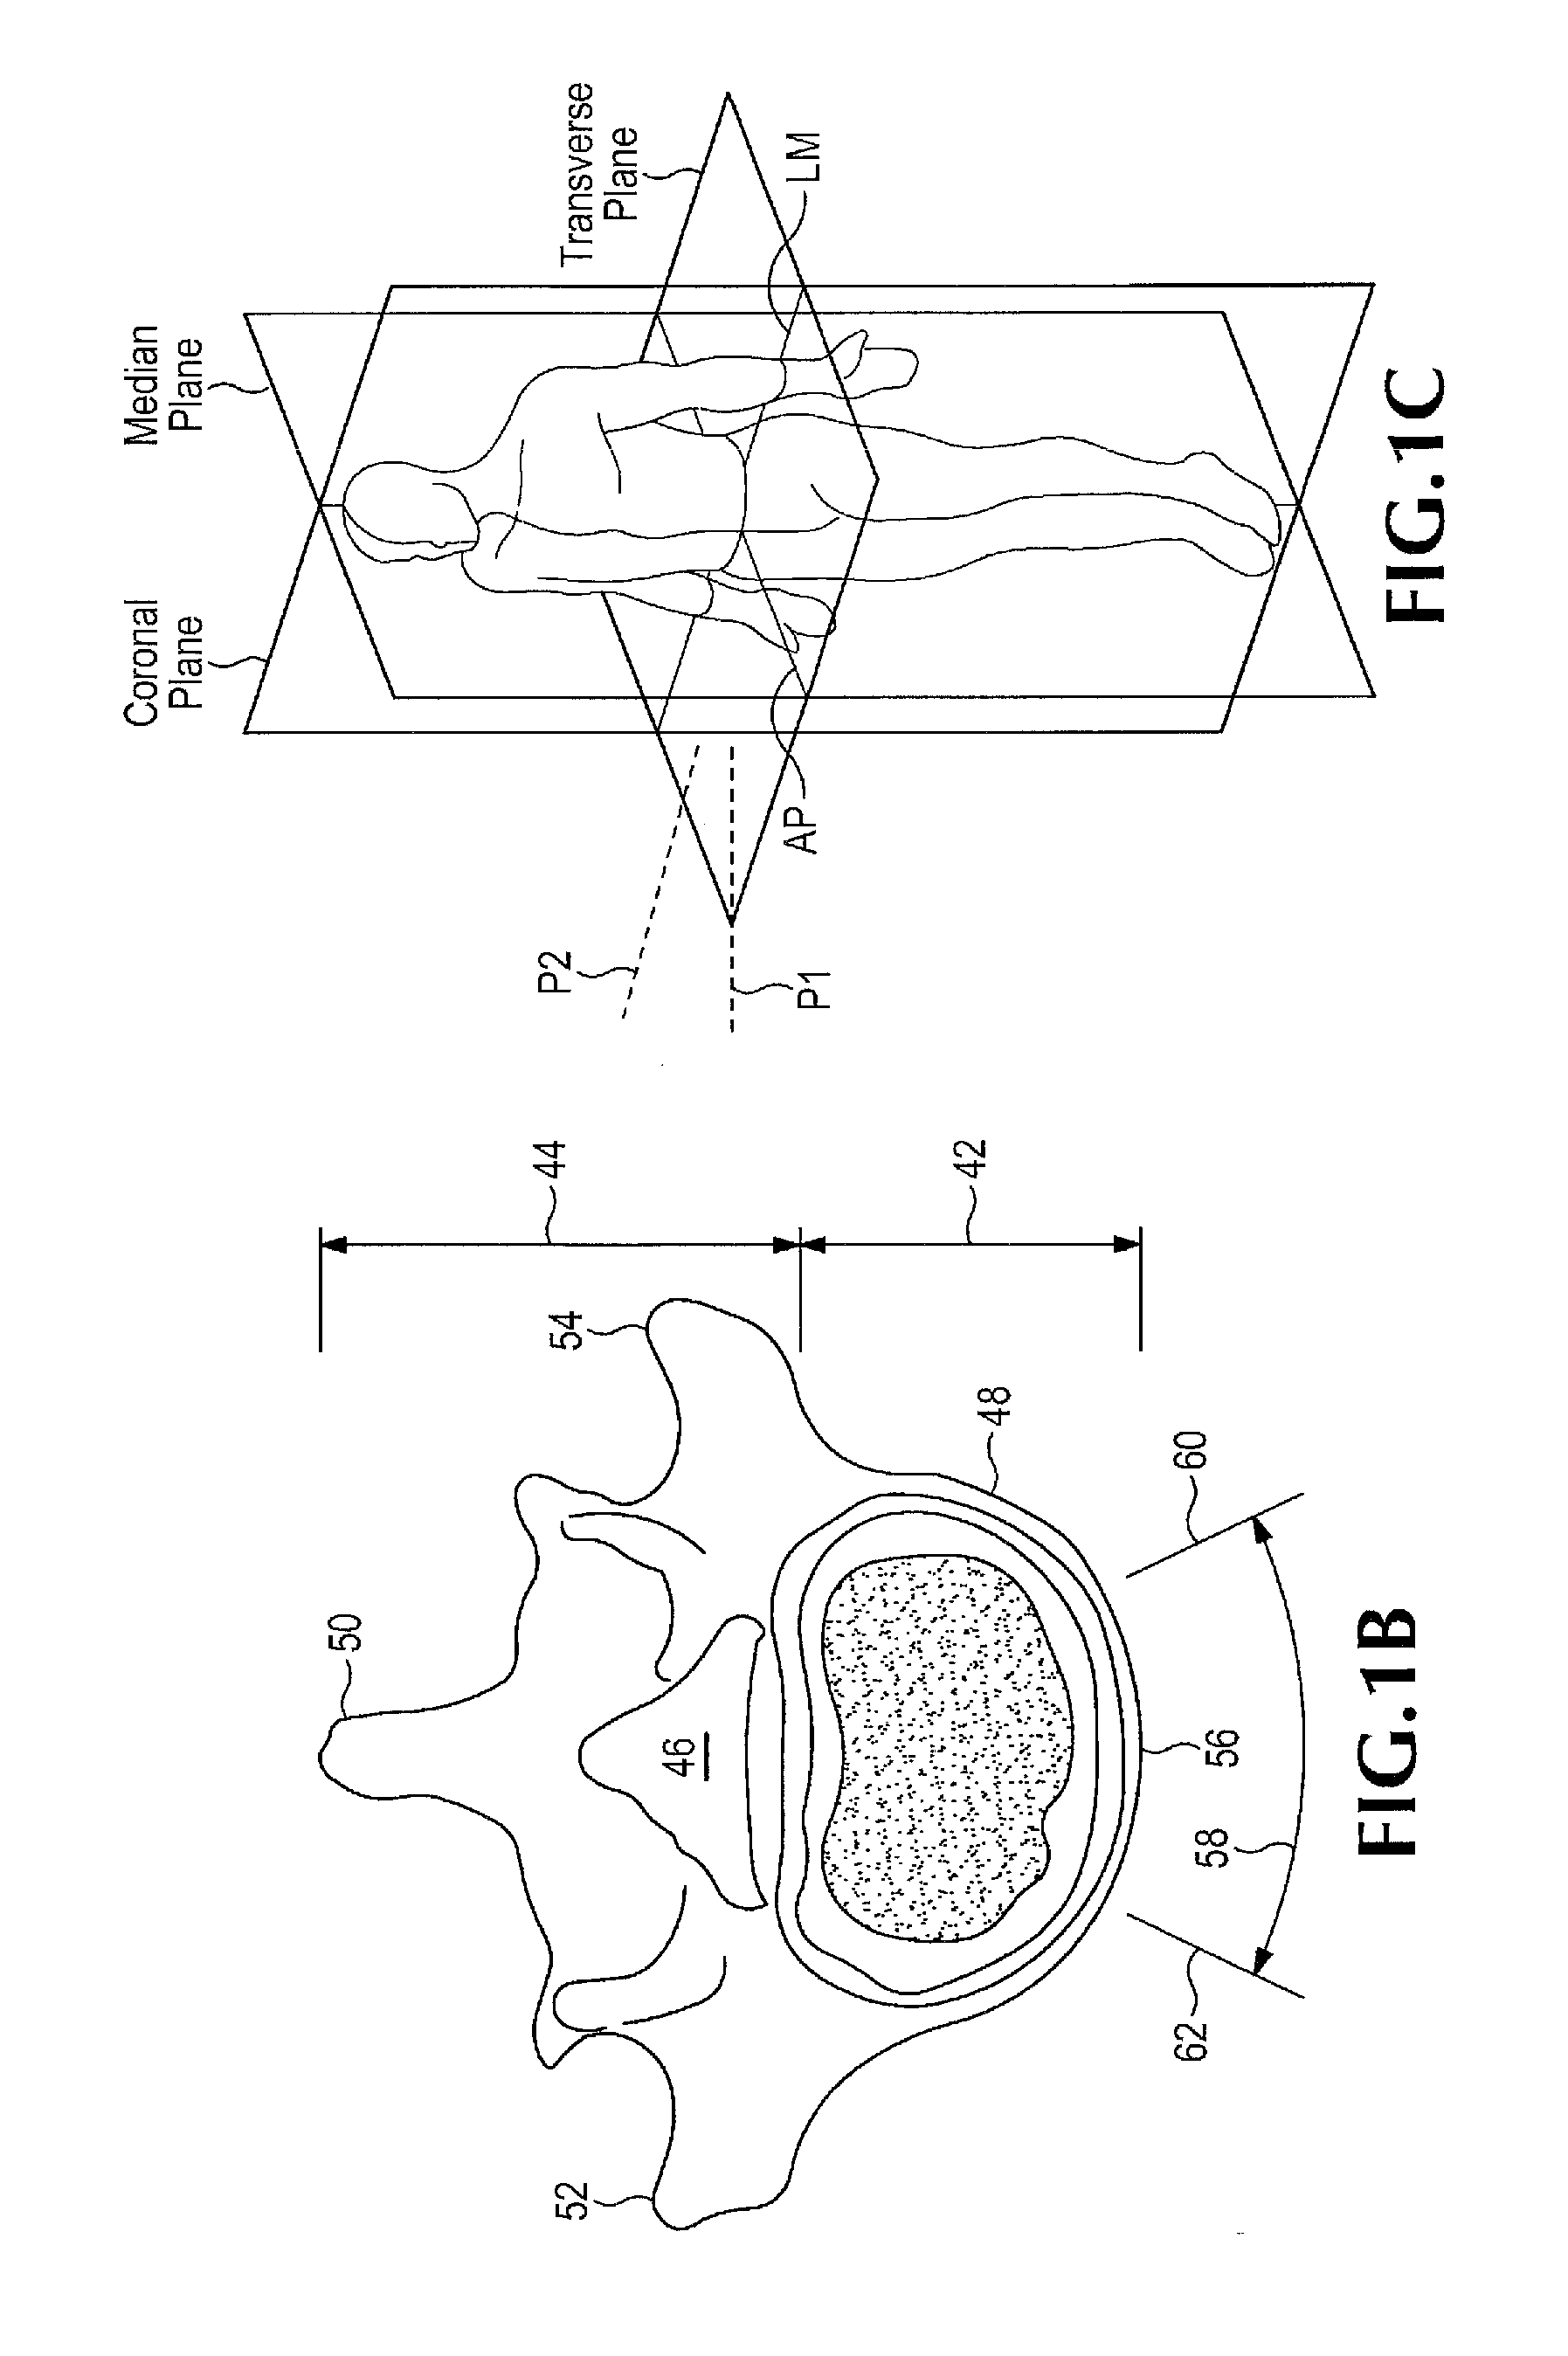 Method of retroperitoneal lateral insertion of spinal implants